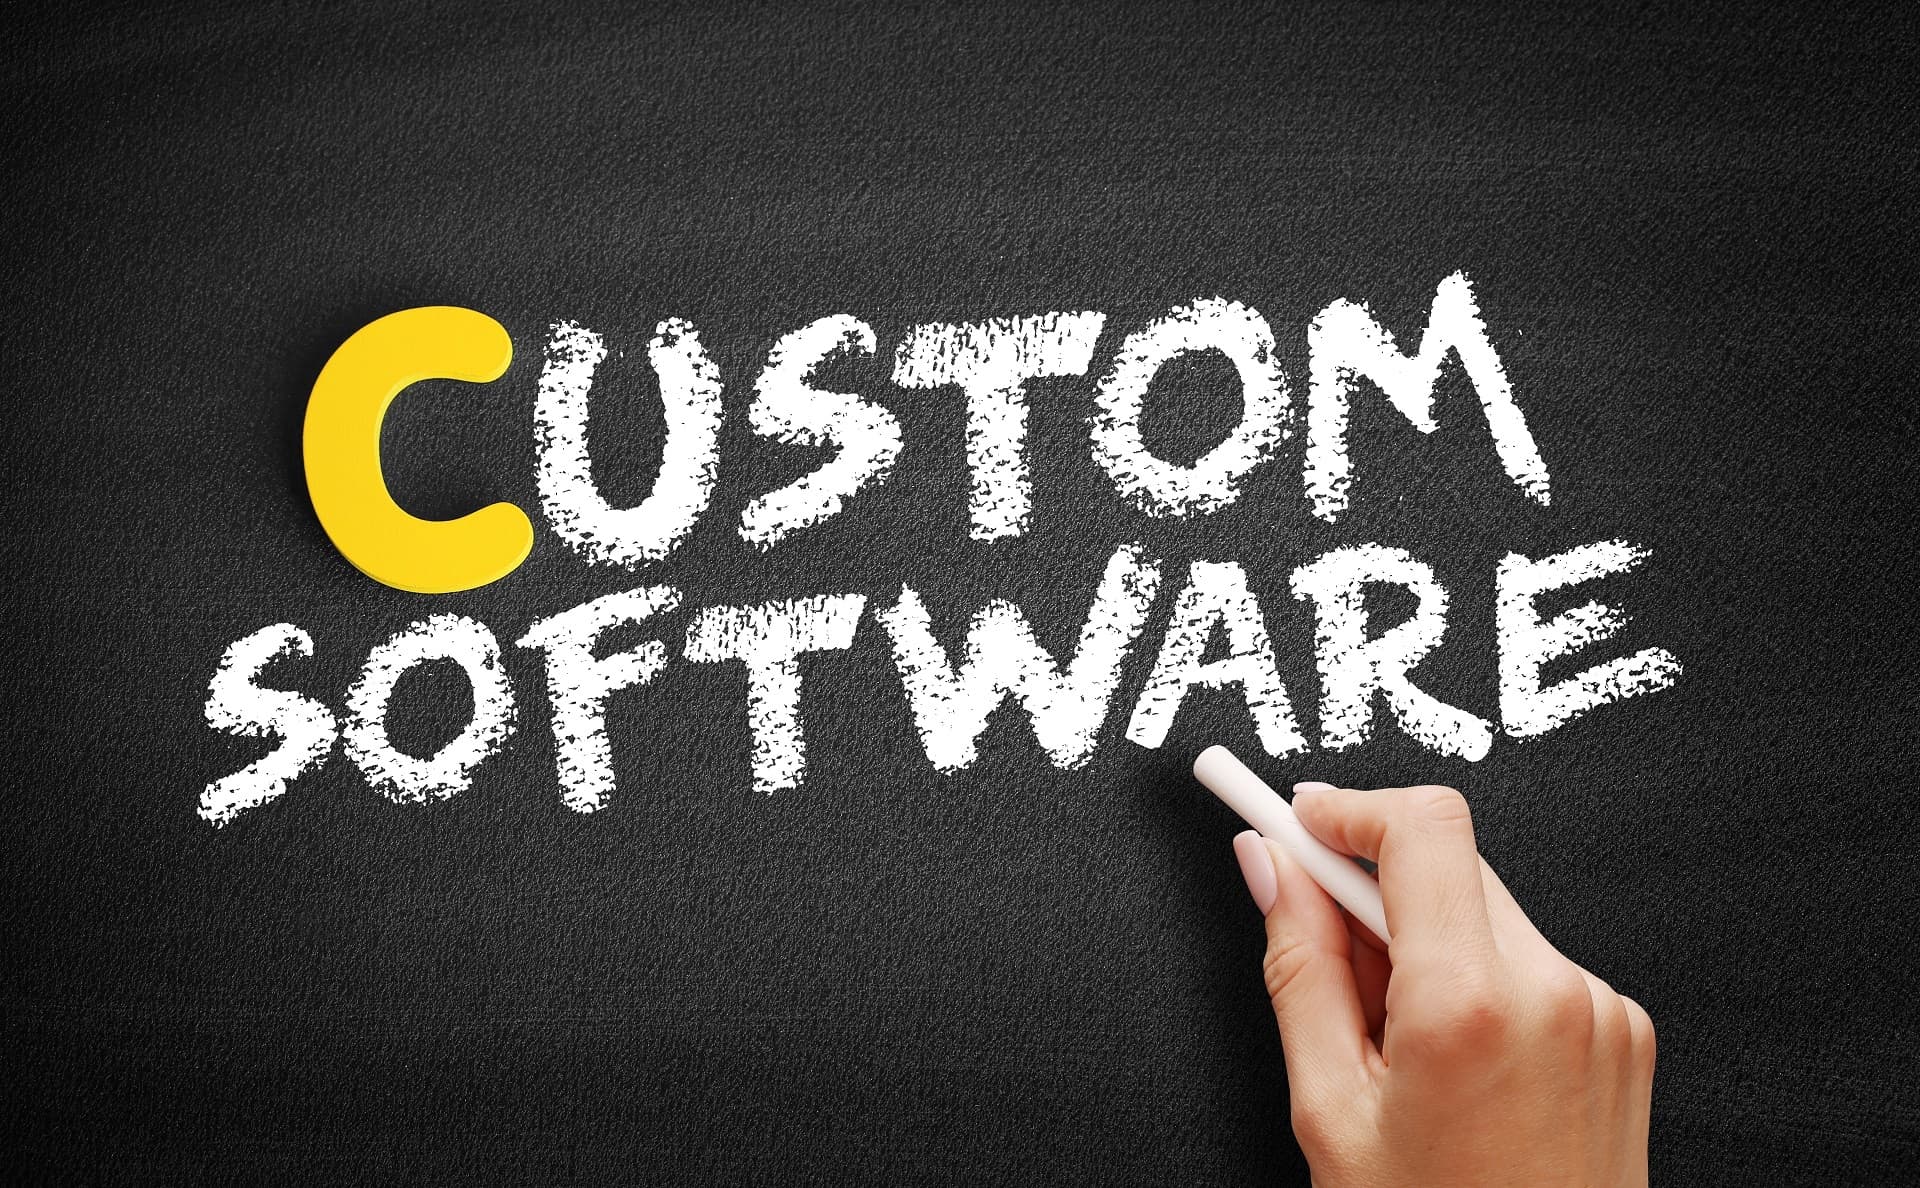 Bespoke software vs off the shelf, which is best for your business?